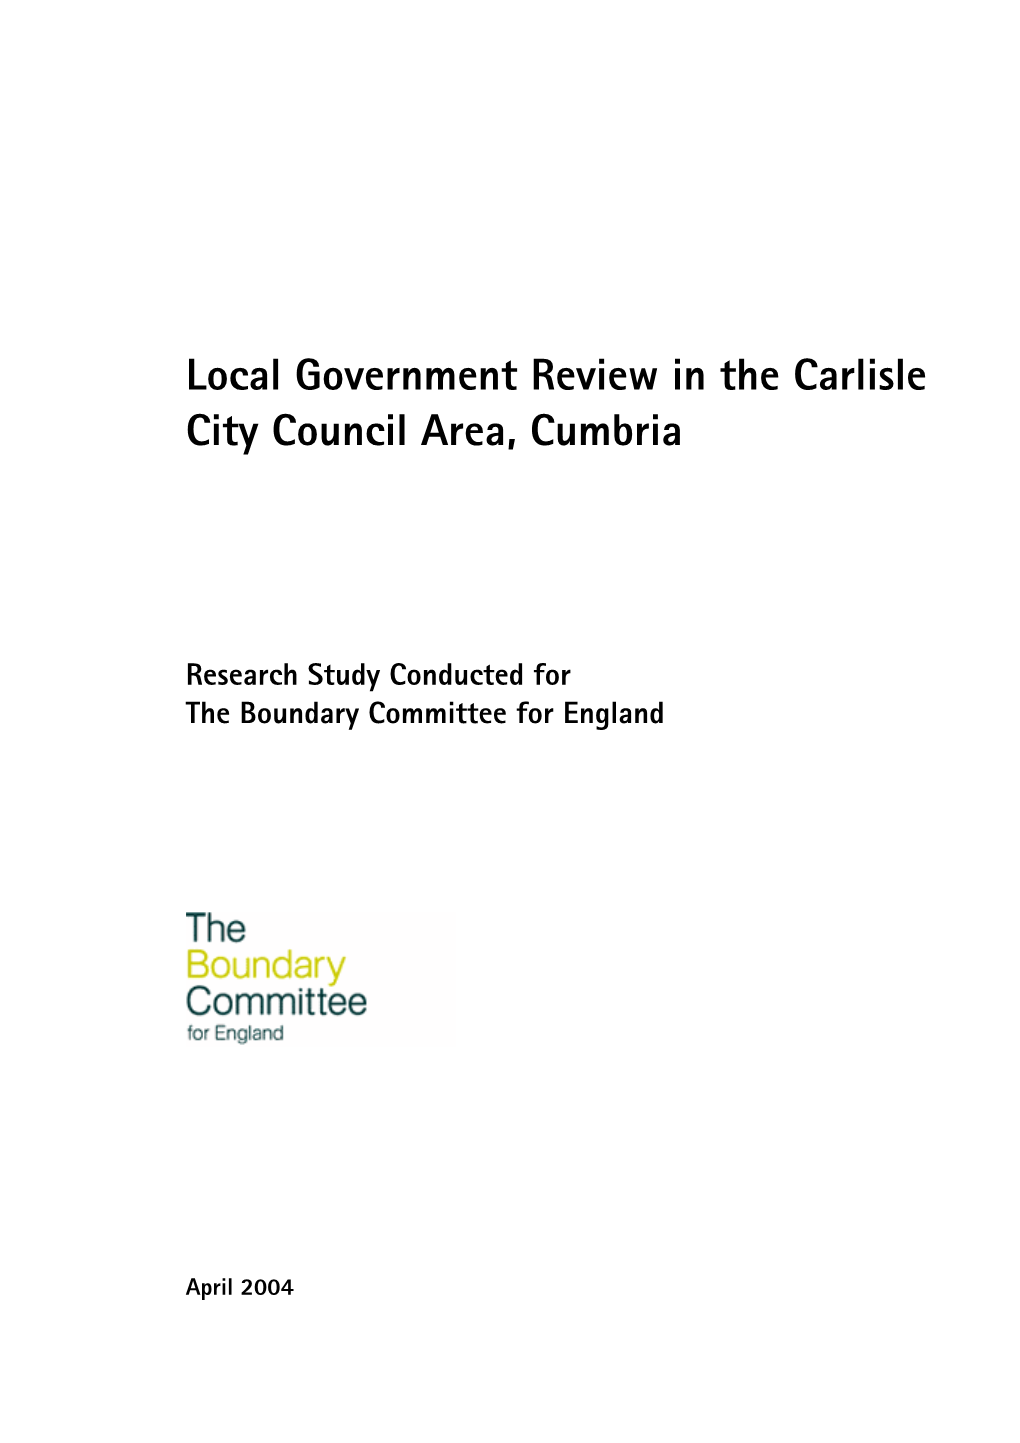 Local Government Review in the Carlisle City Council Area, Cumbria